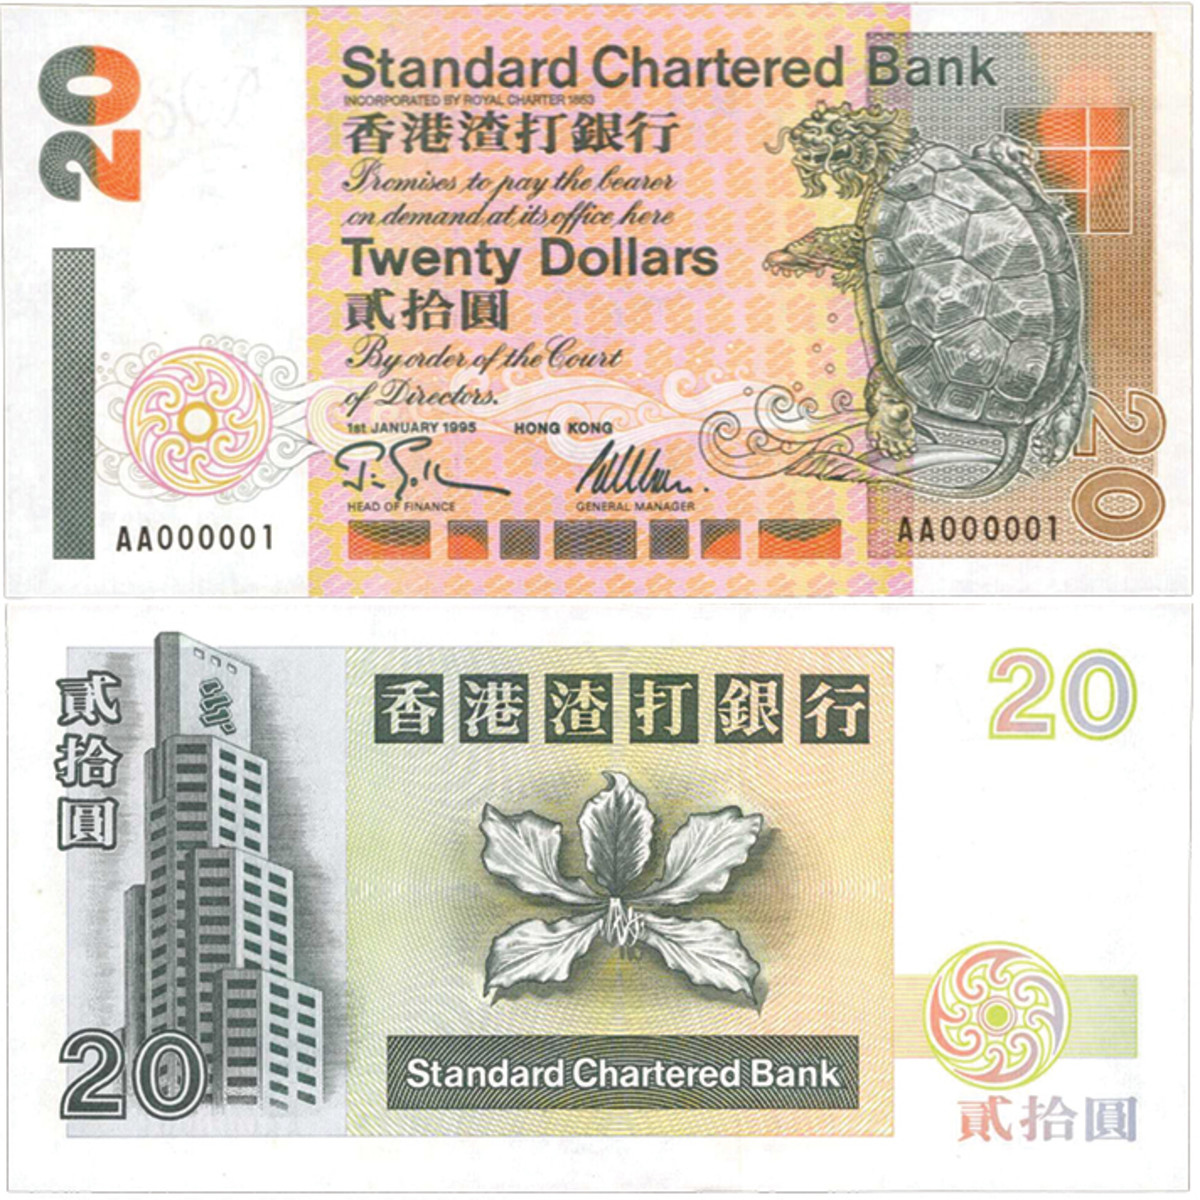 Standard Chartered Bank. 20 Dollars, 1994-97. P-285b. Serial Number 1. PMG Gem Uncirculated 66 EPQ. This note is estimated at $10,000-$12,000 and is well on its way to reaching that estimate according to current online bidding.